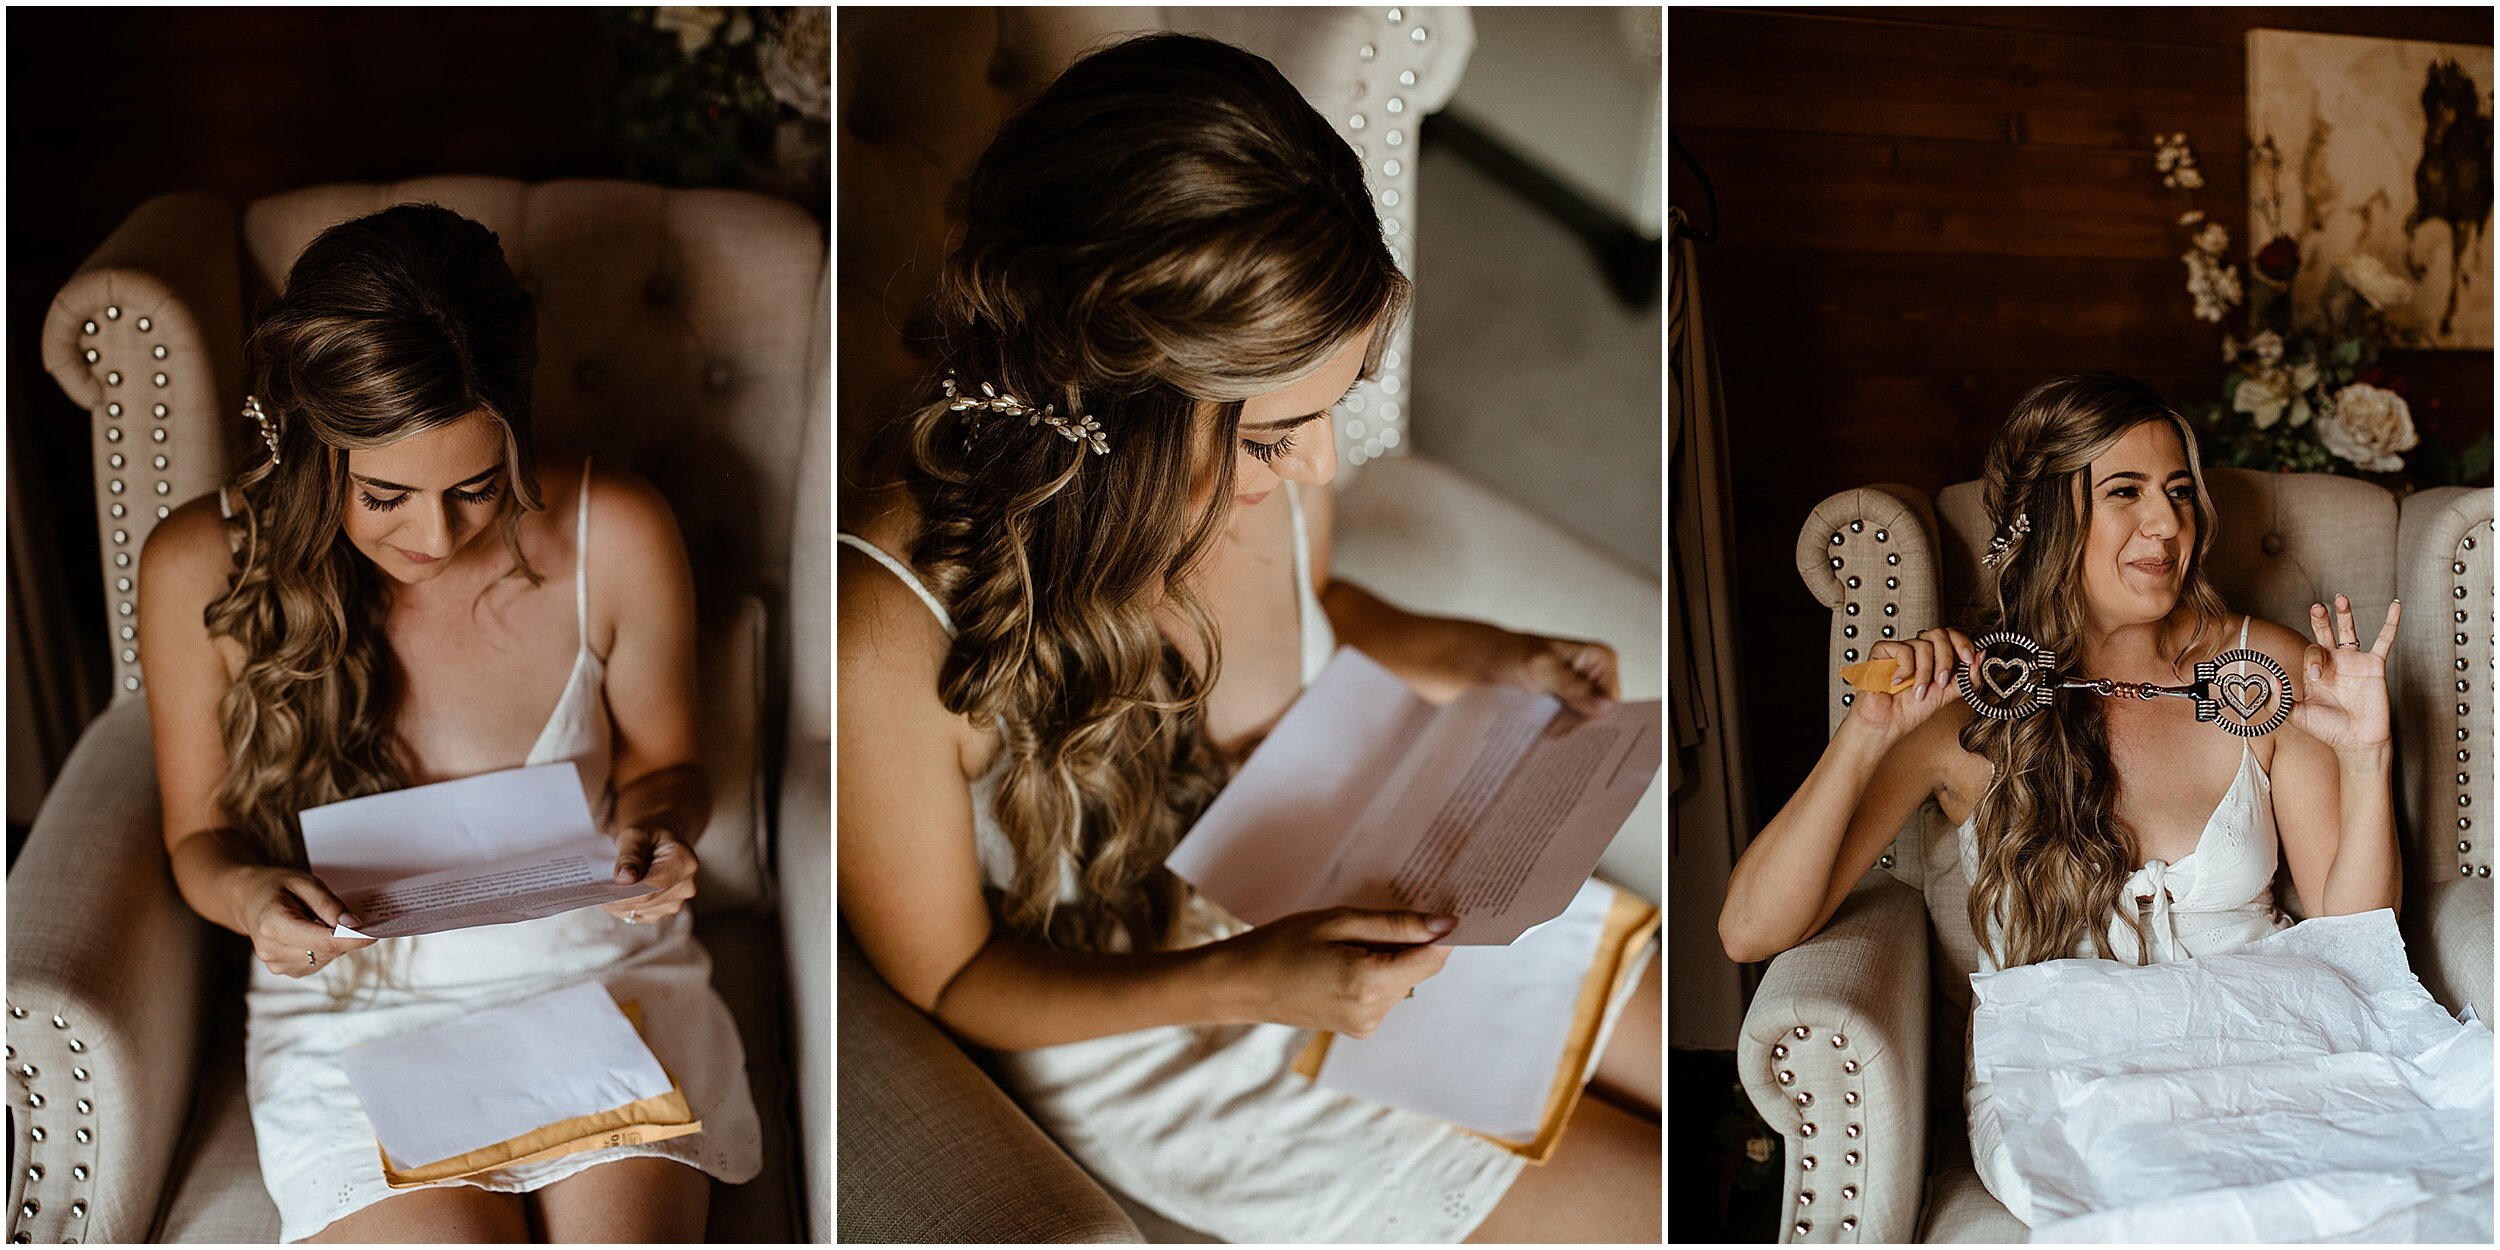 bride opening letter from groom